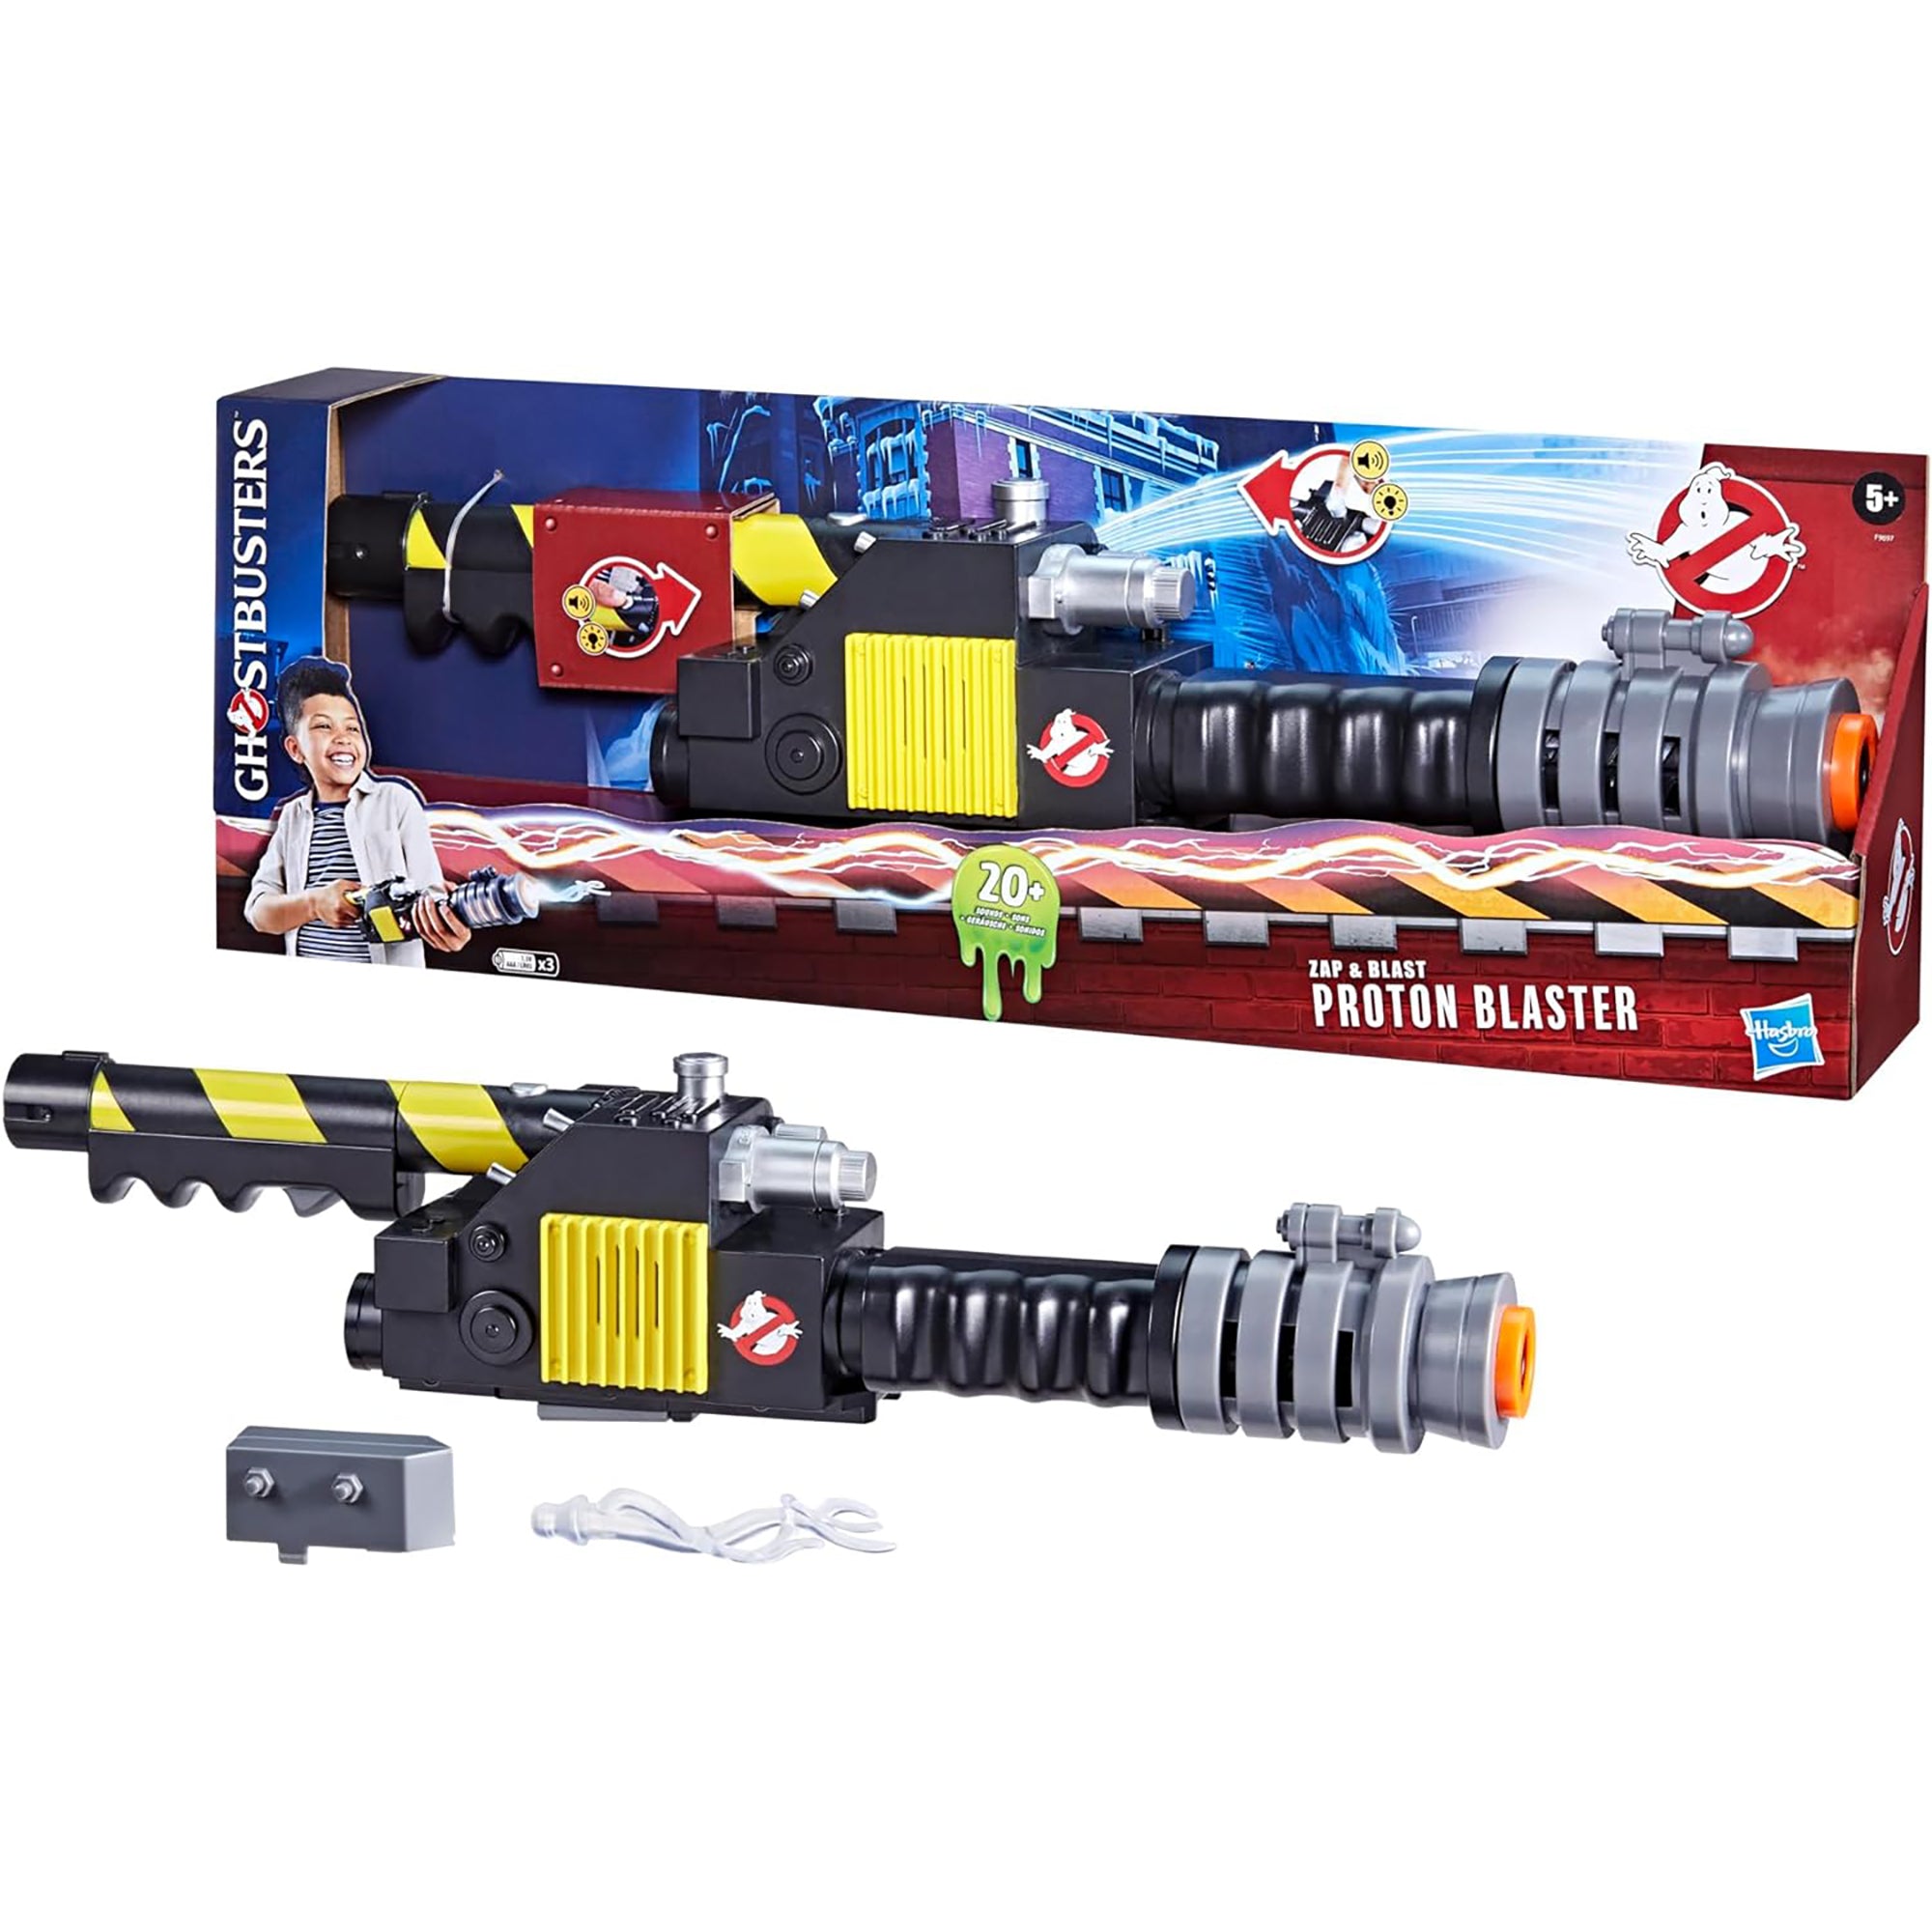 Ghostbusters Zap and Blast Proton Blaster, 22 Inches, 1 Count